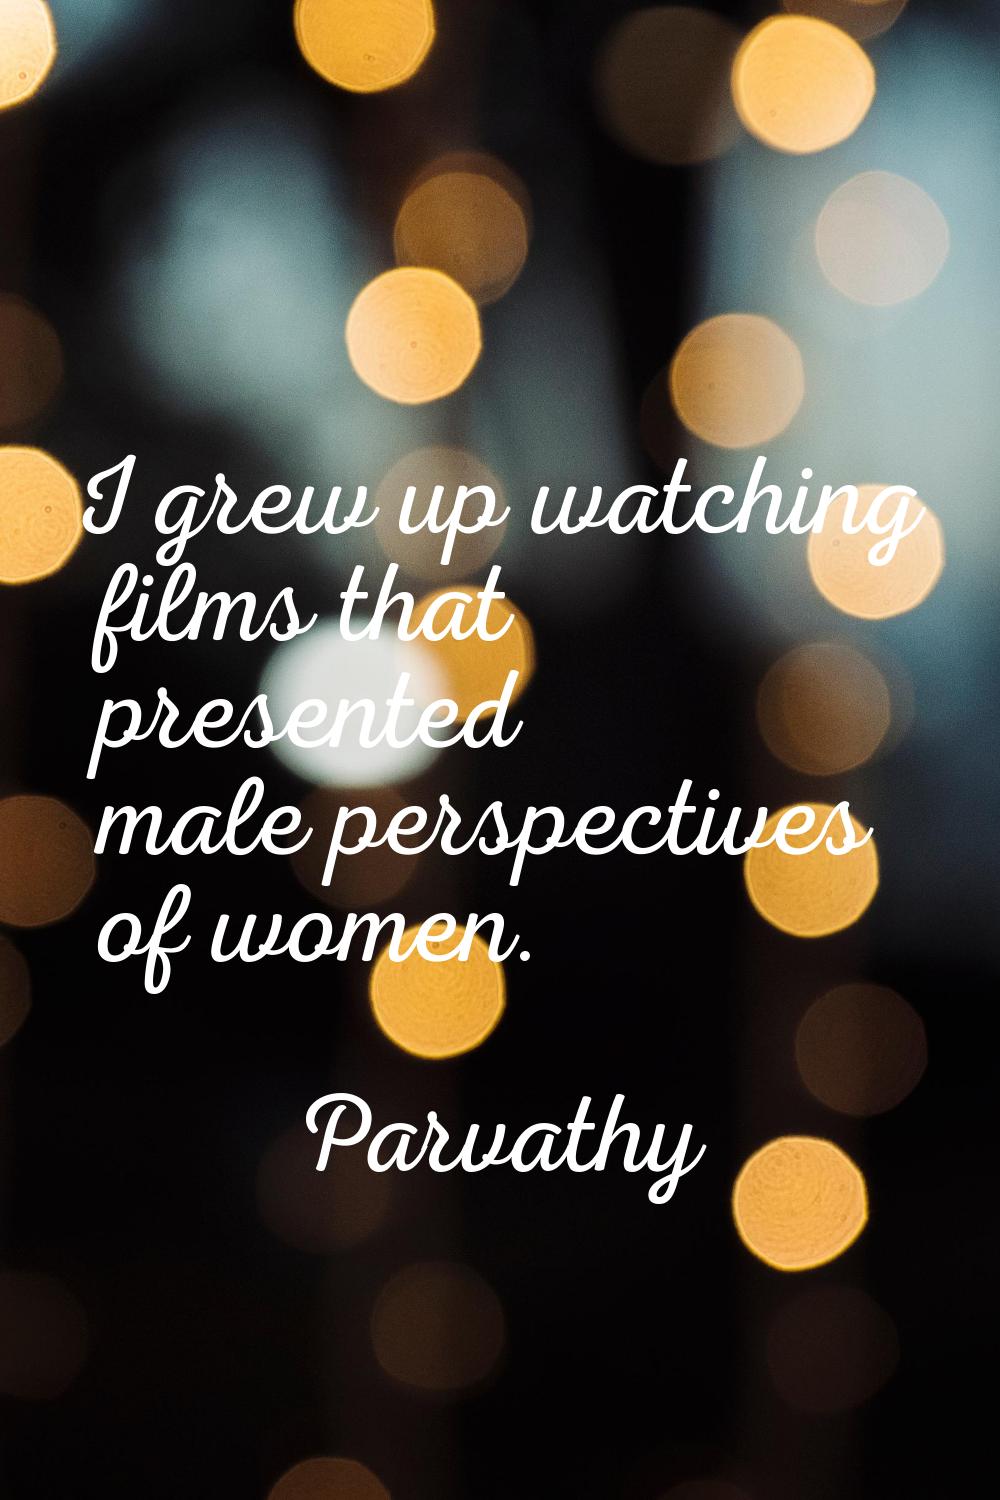 I grew up watching films that presented male perspectives of women.